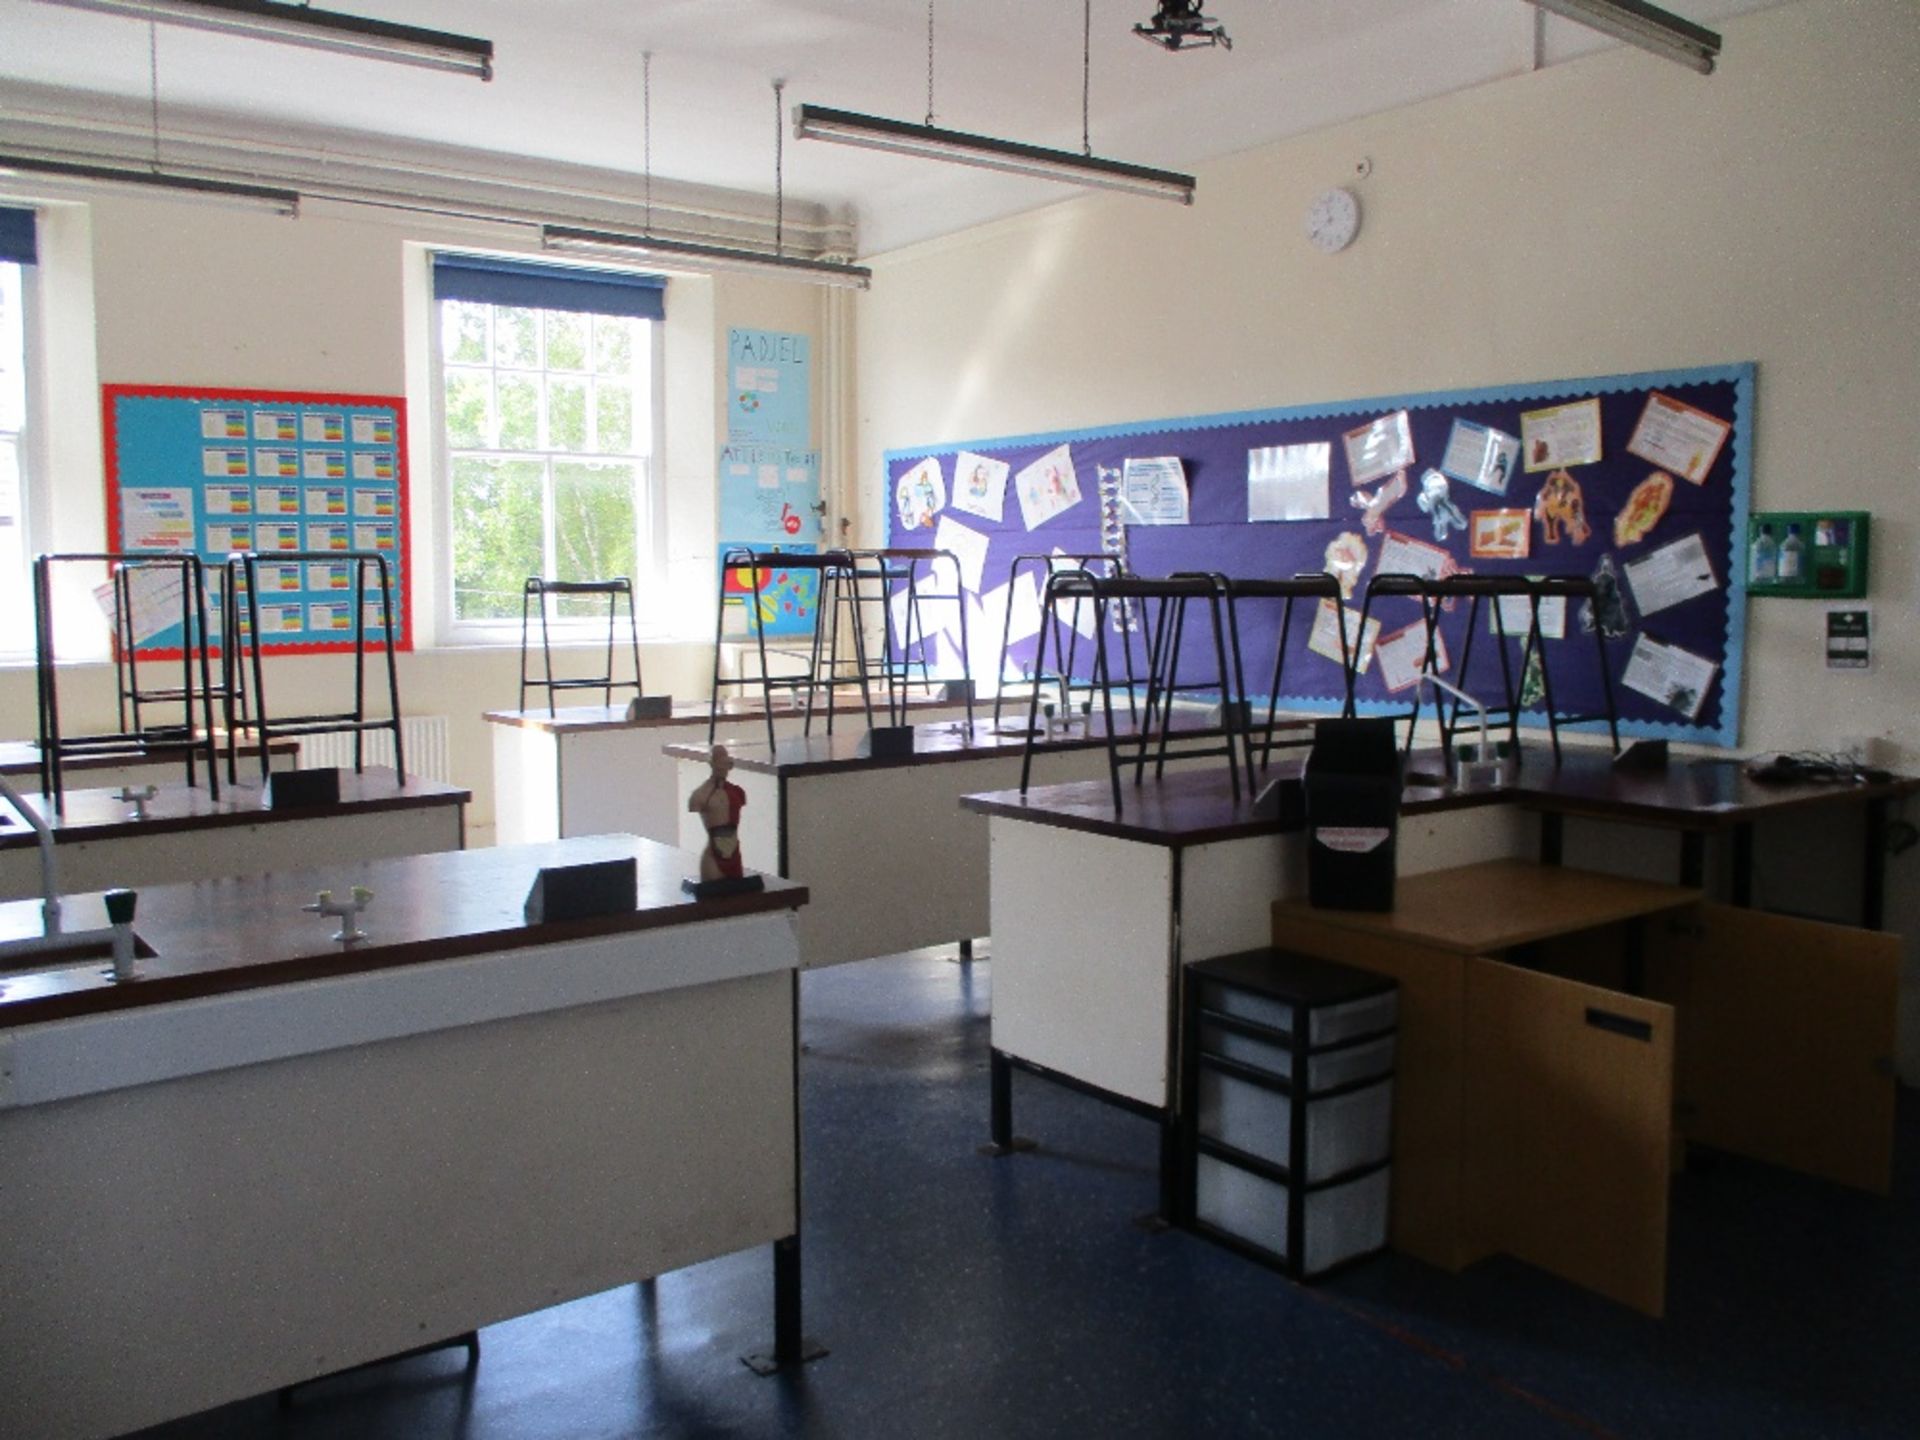 Contents of Science Lab